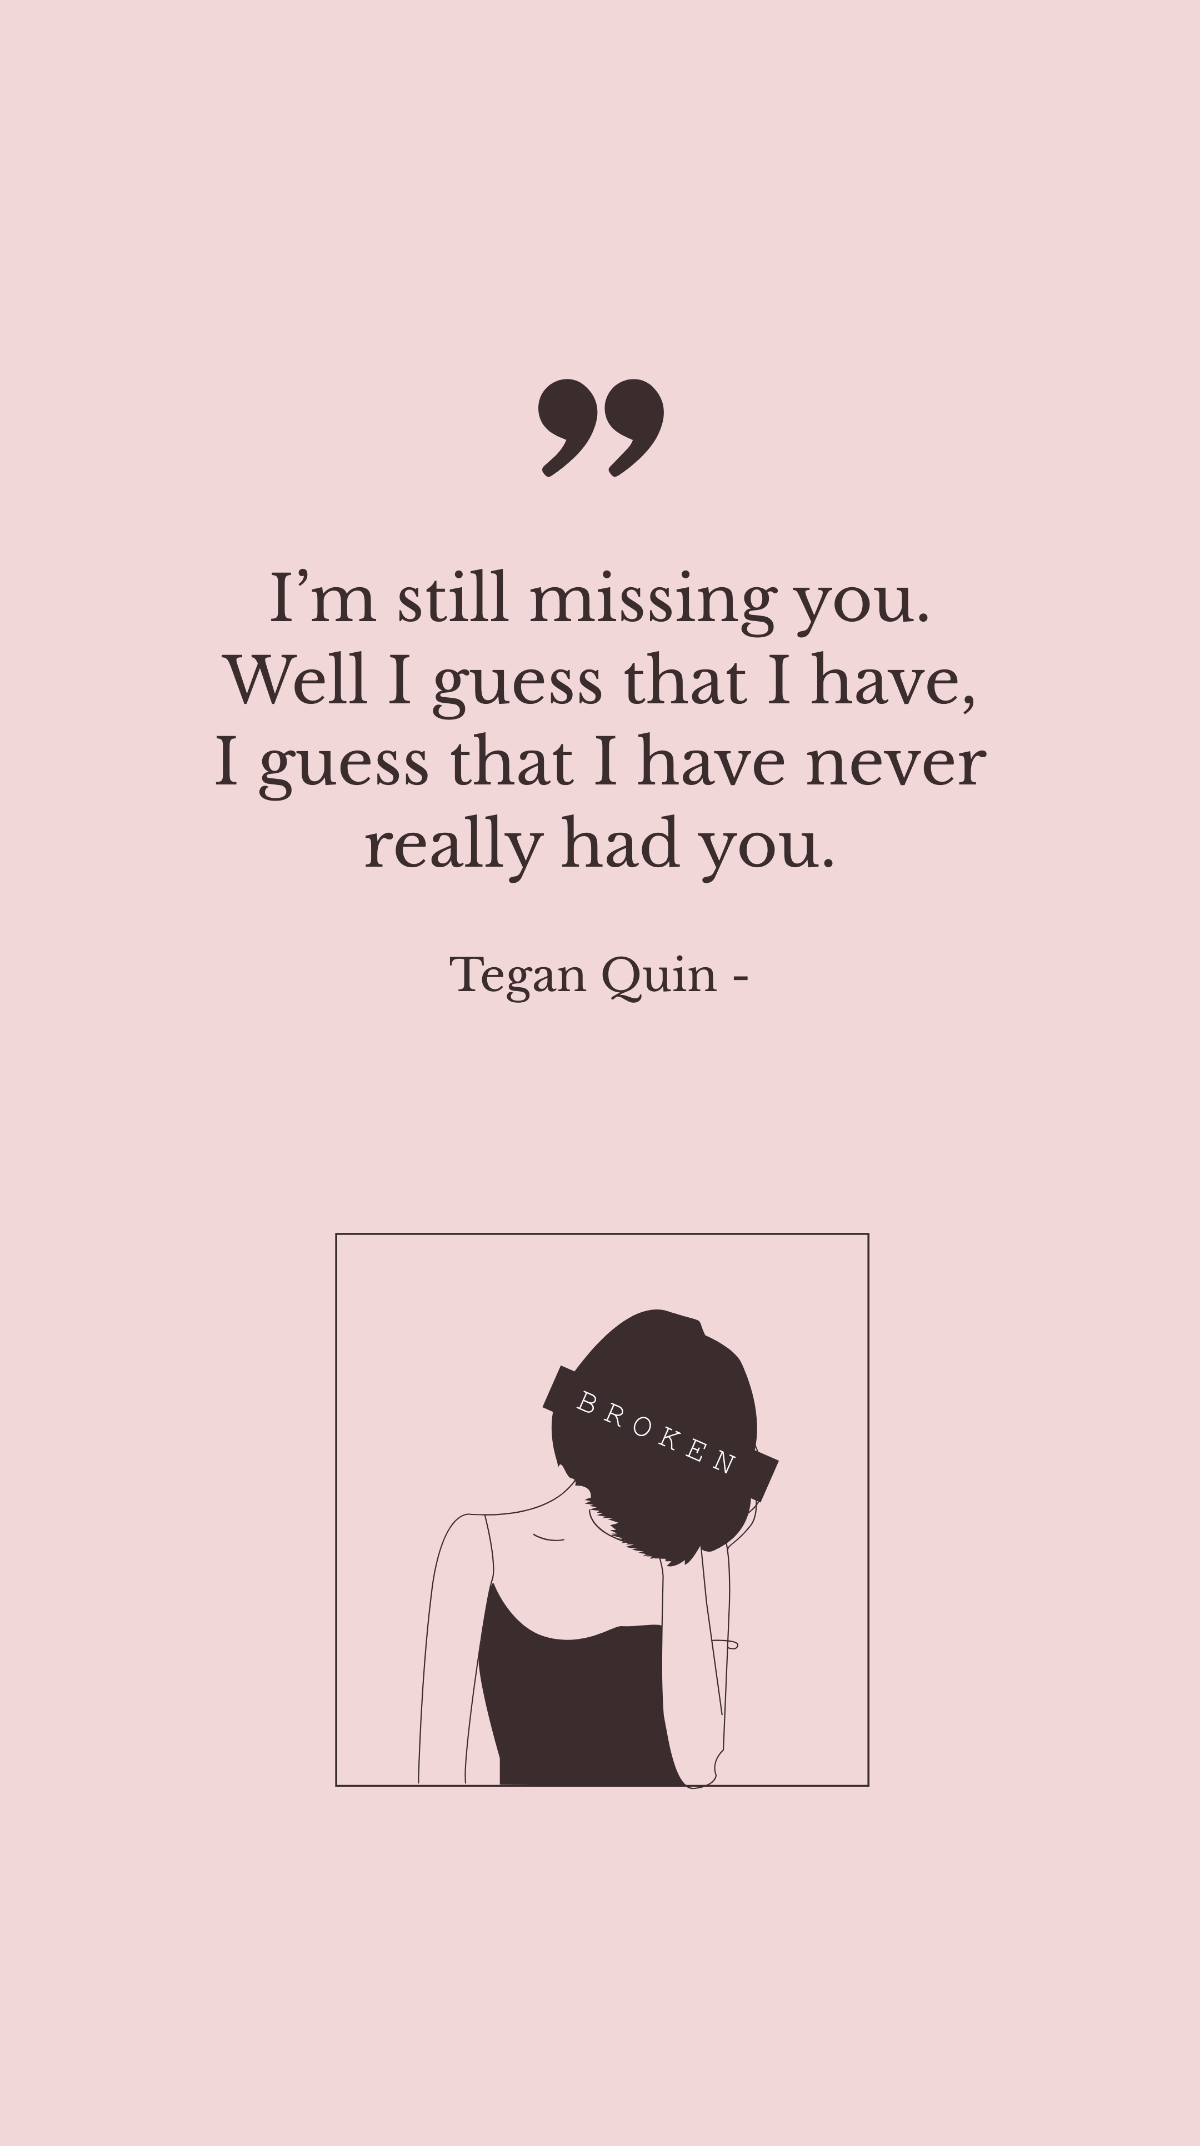 Free Tegan Quin - I’m still missing you. Well I guess that I have, I guess that I have never really had you. Template